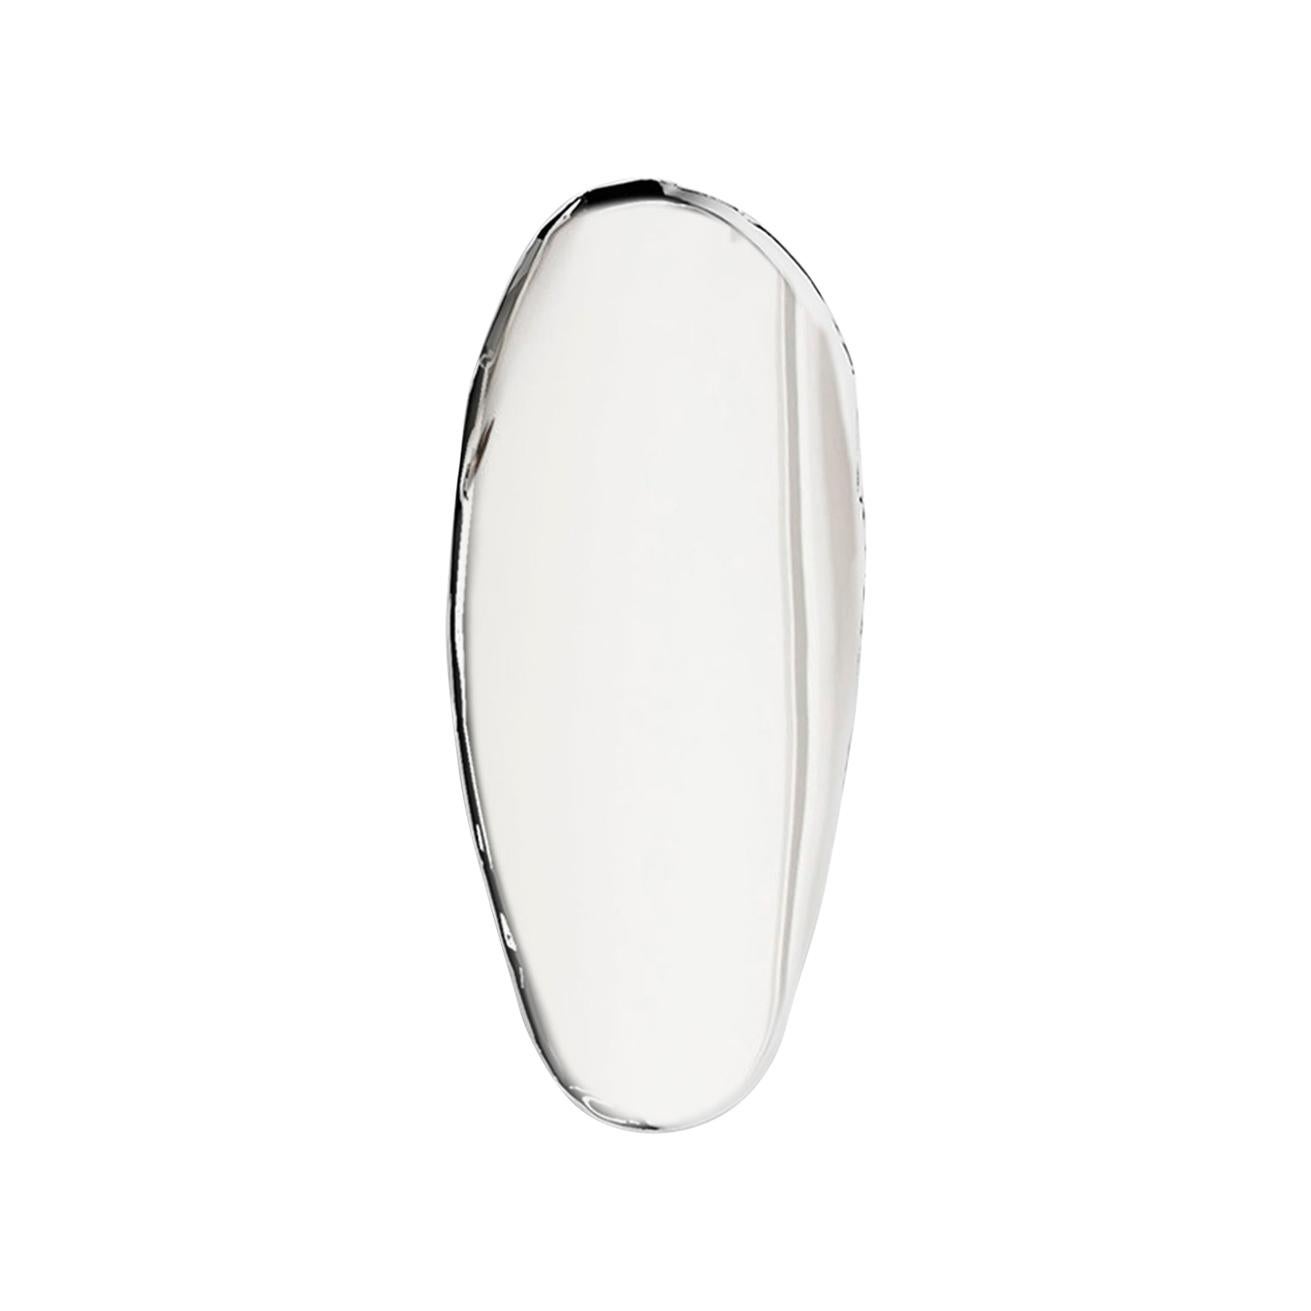 Mirror Tafla O1 in Polished Stainless Steel by Zieta For Sale